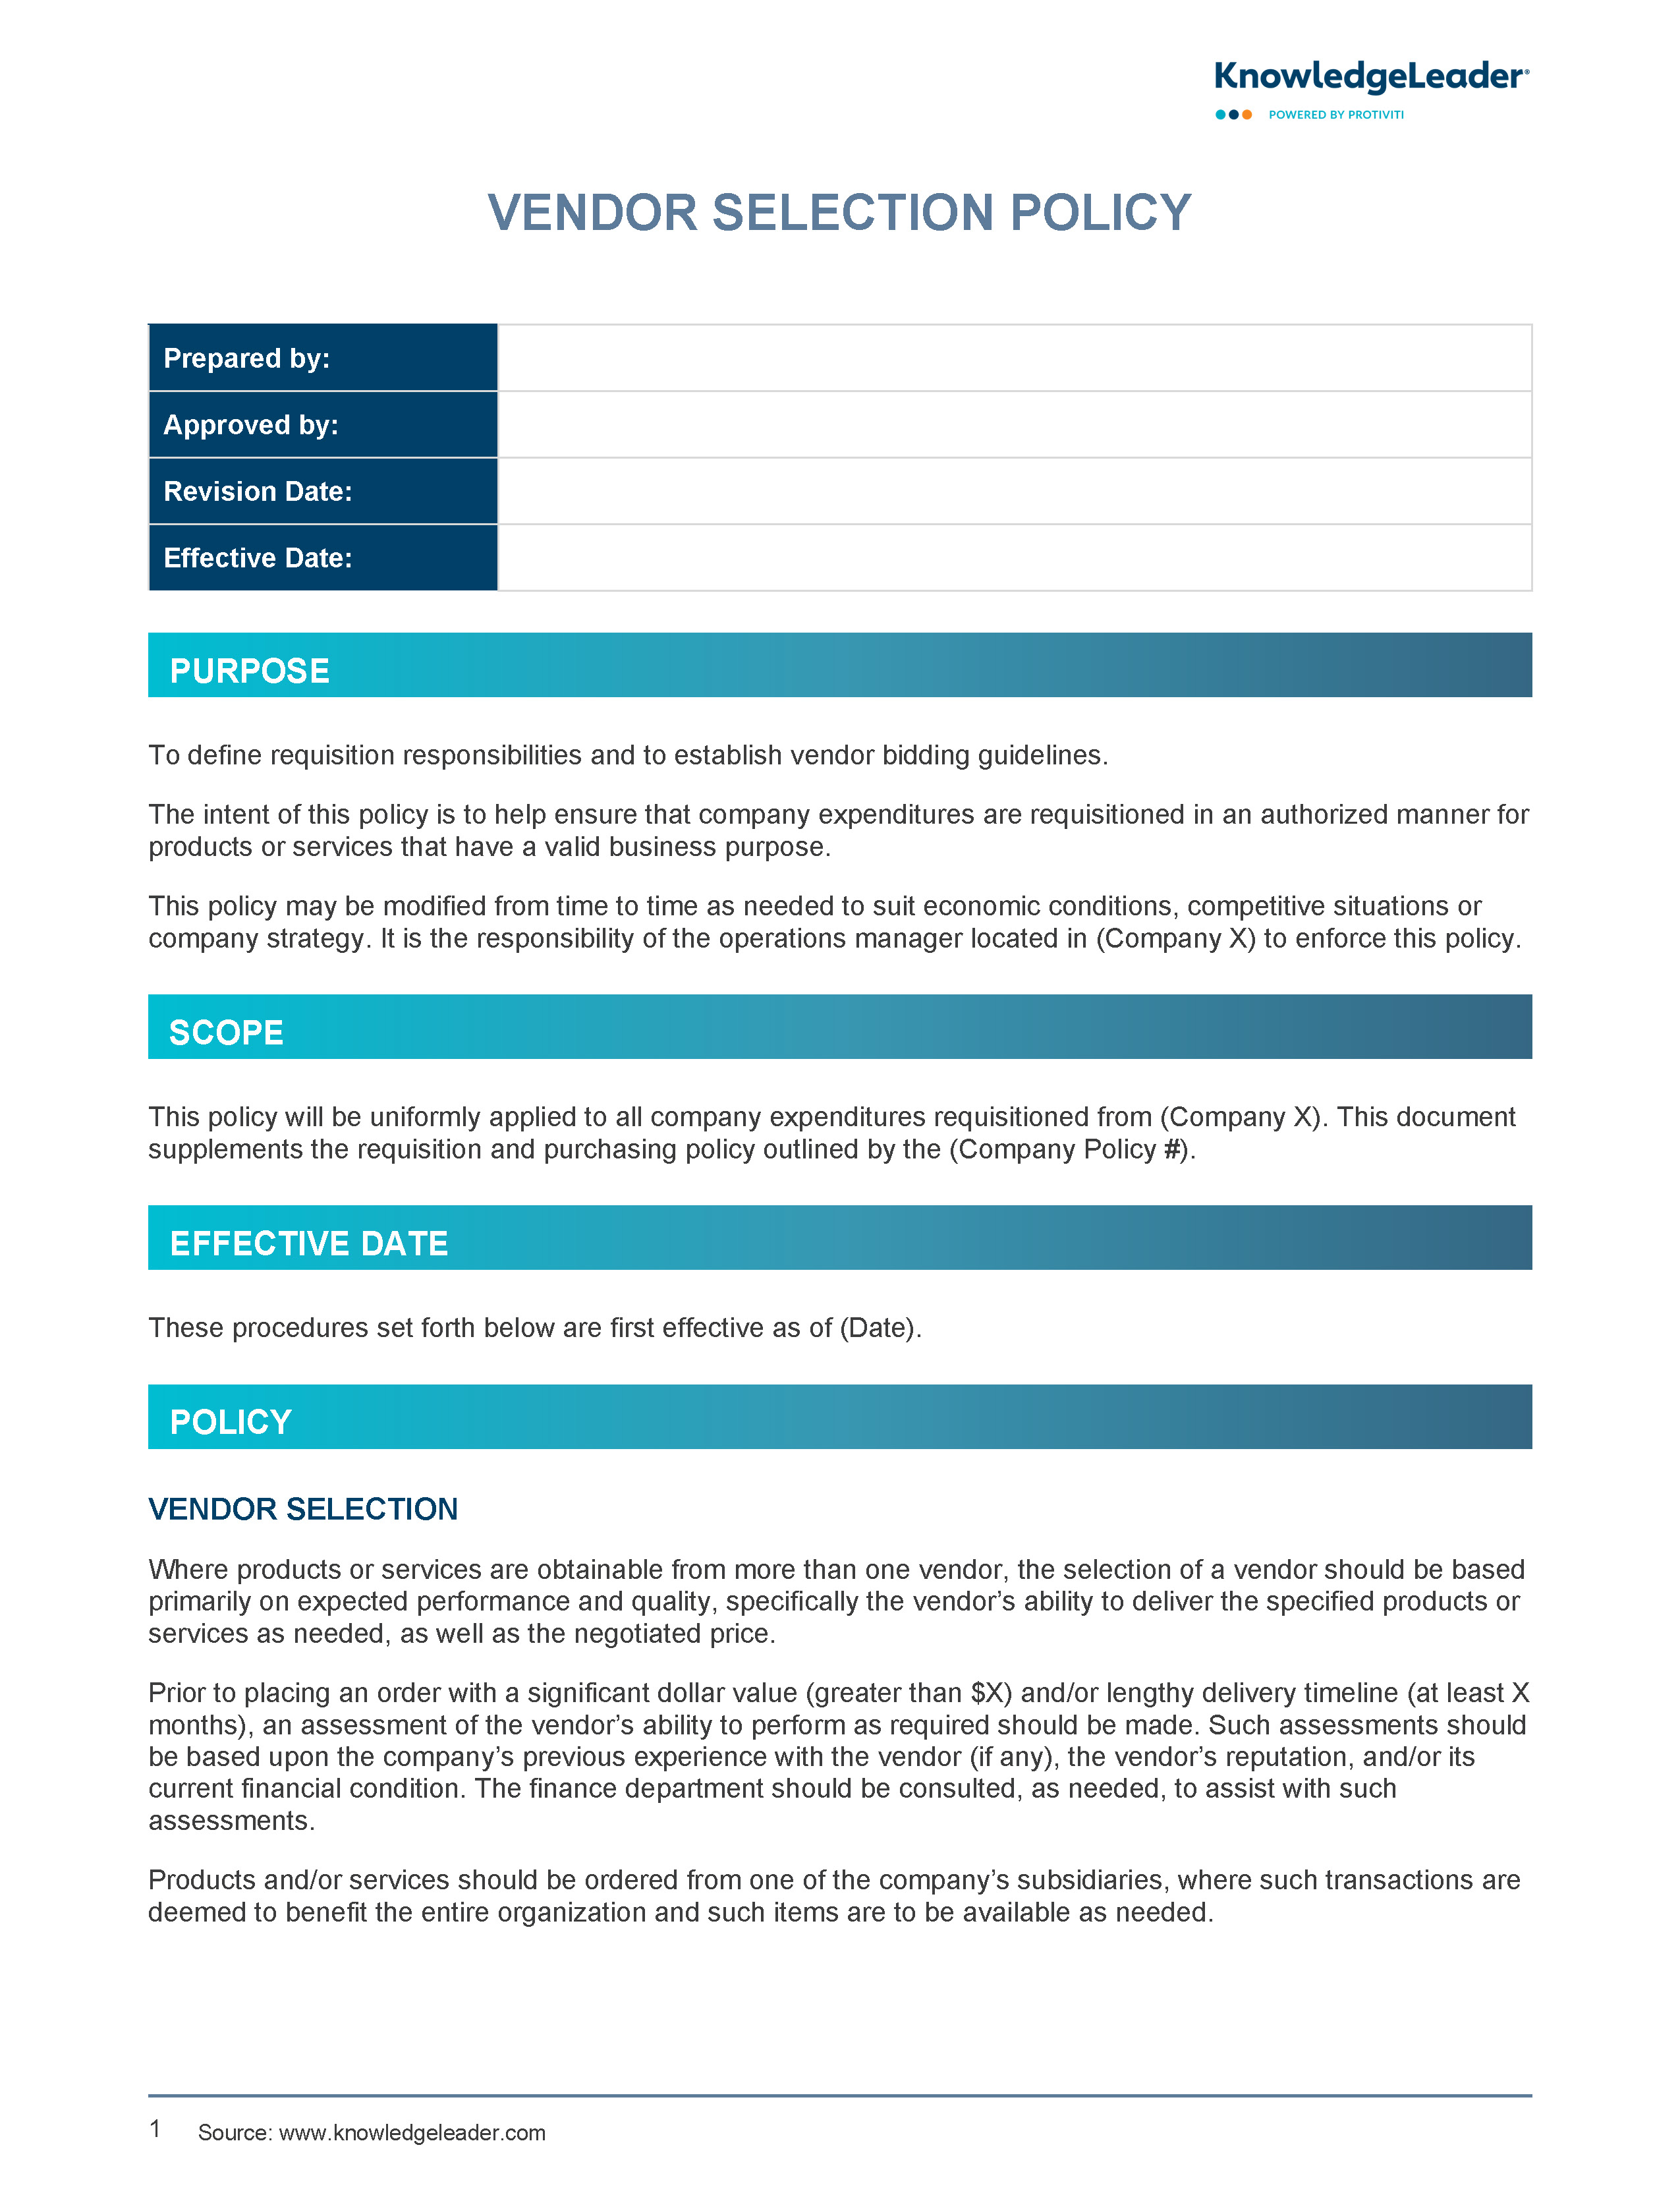 Screenshot of the first page of Vendor Selection Policy